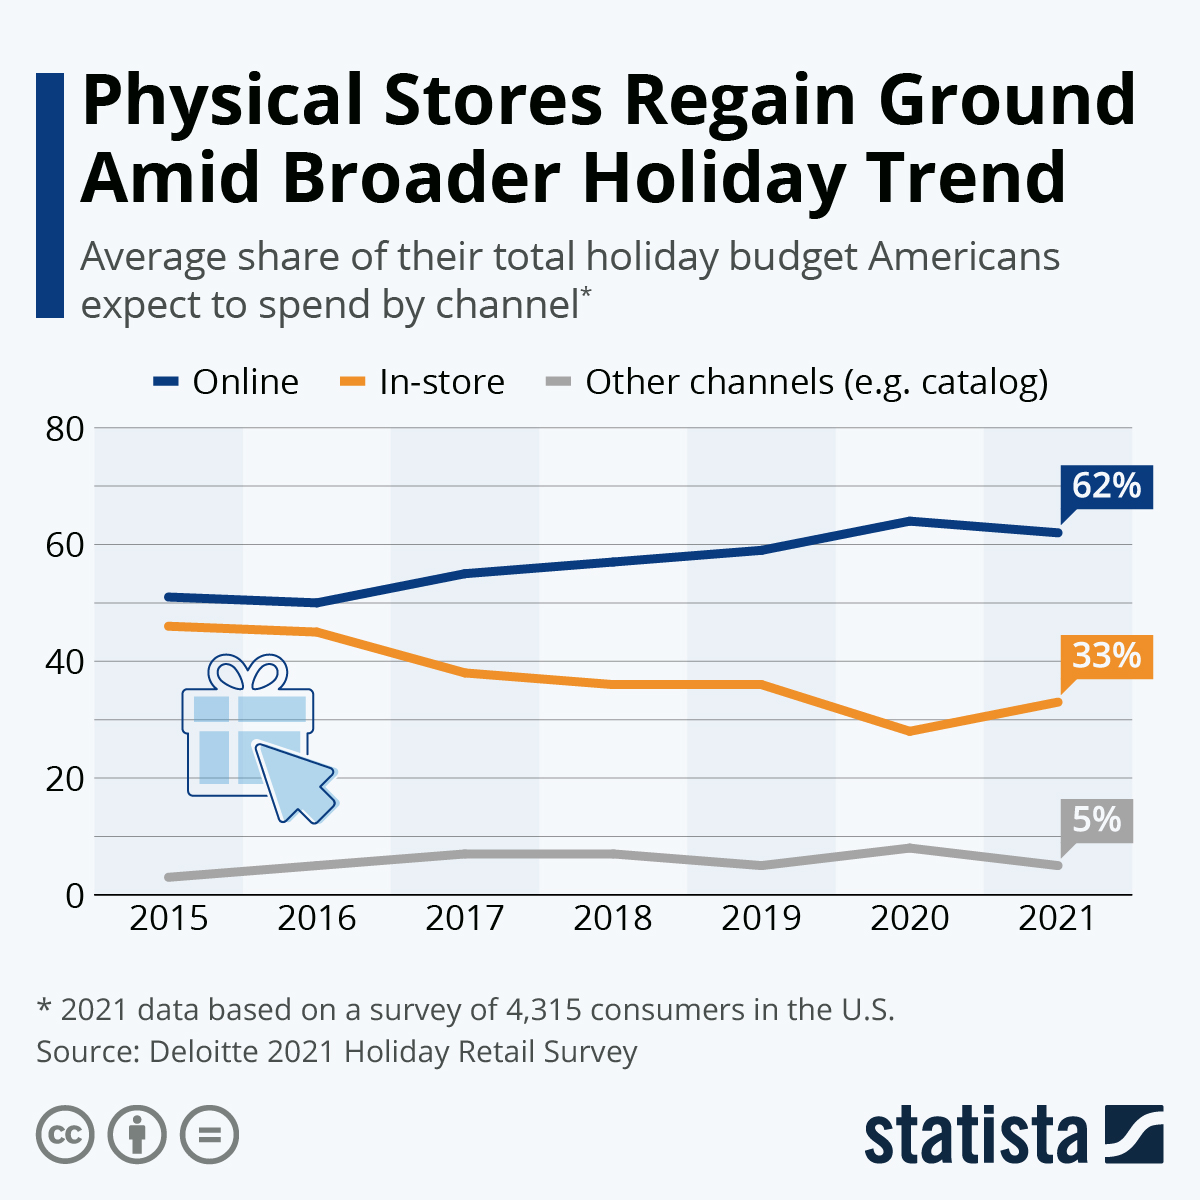 Physical Stores Regain Ground Amid Broader Holiday Trend